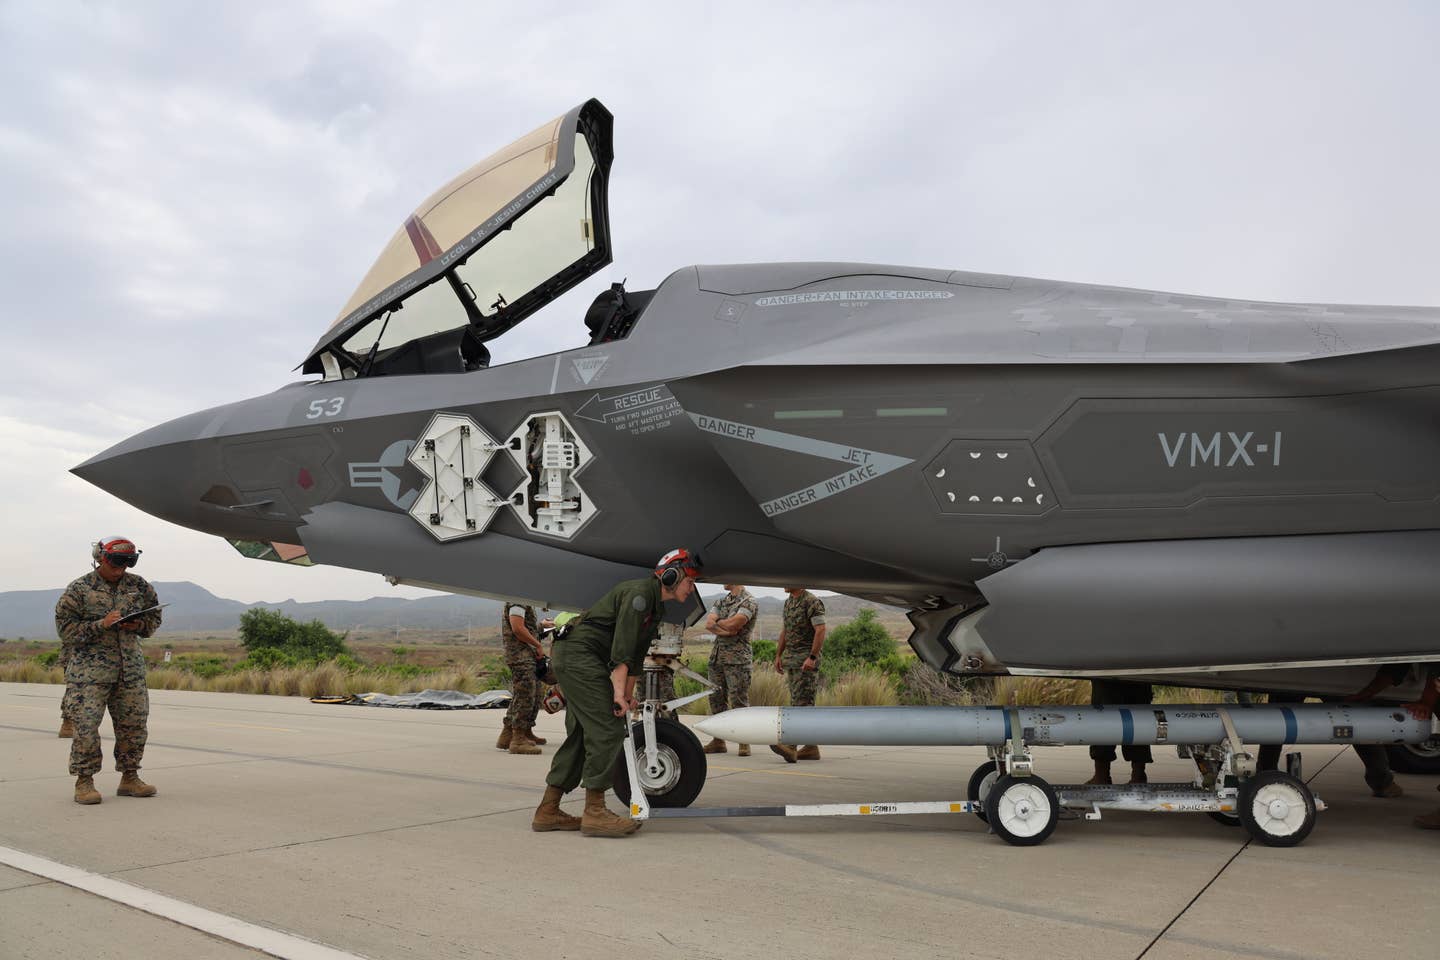 Marines load AIM-120 captive training rounds onto a VMX-1 F-35B at an austere forward base during training. (Author's photo)